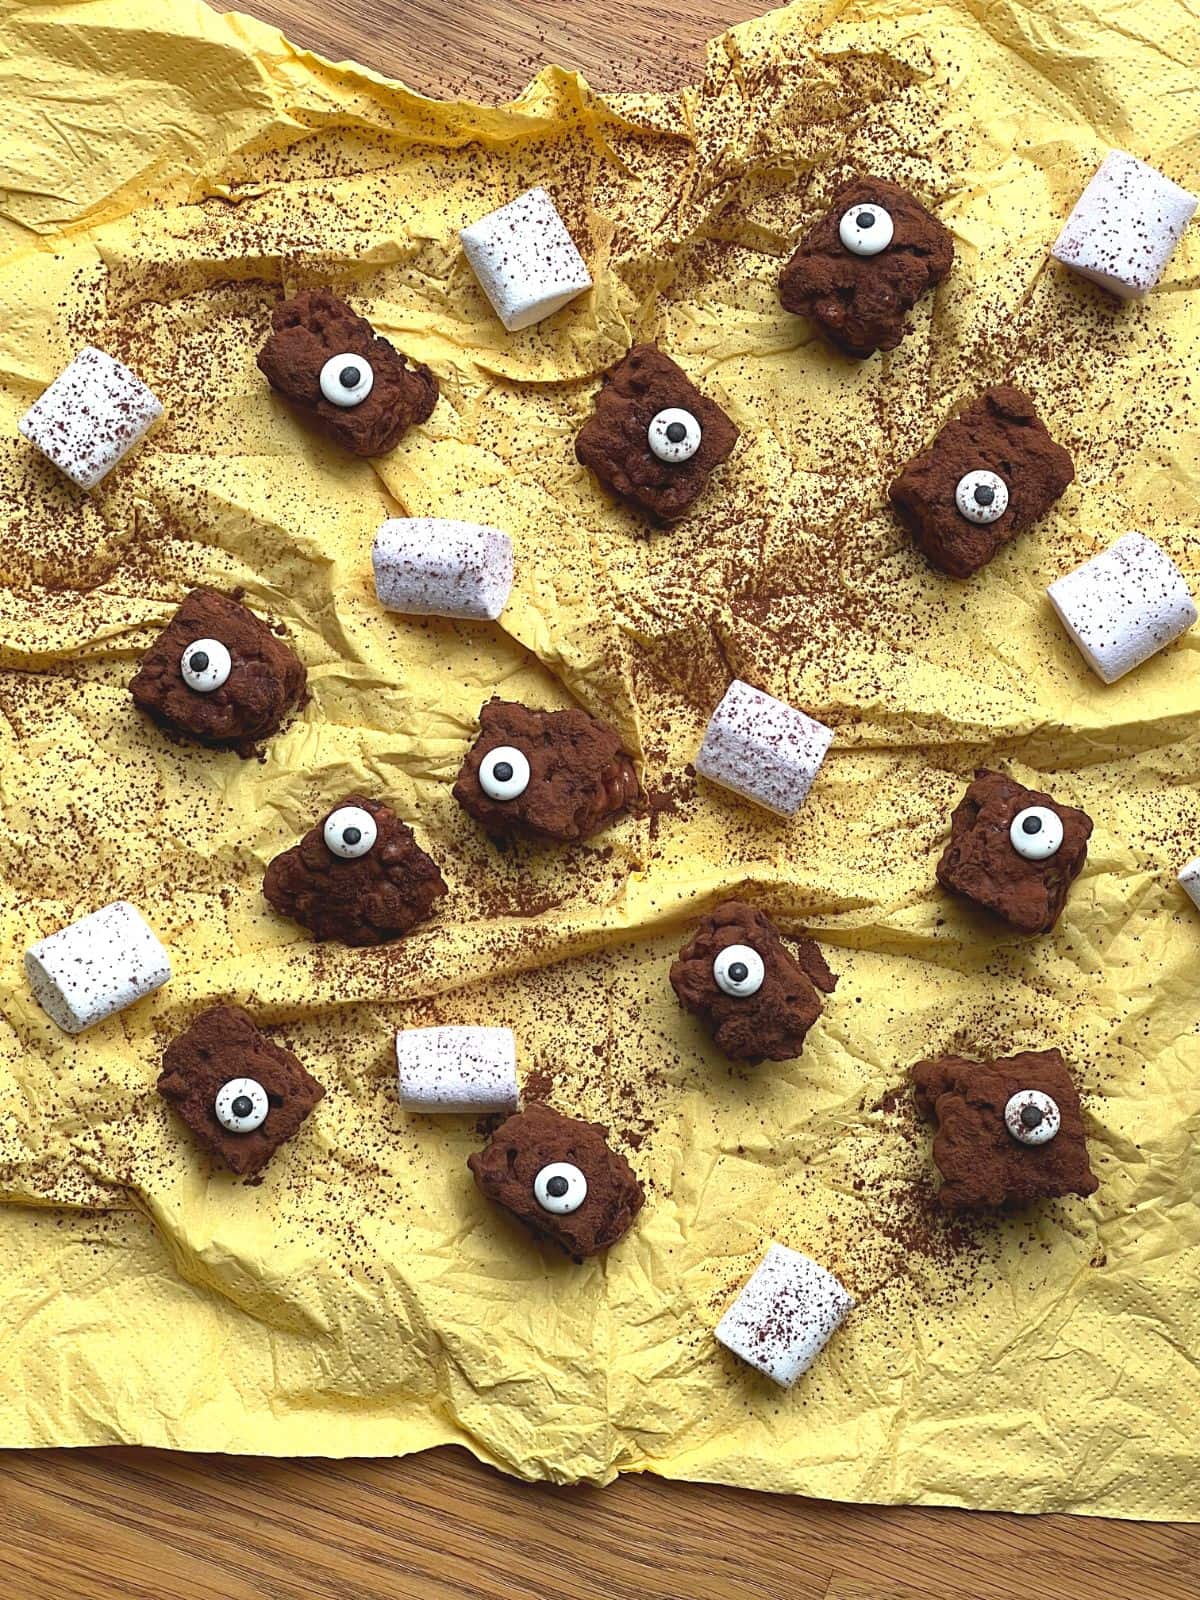 Chocolate rice krispie squares with candy eyes on yellow tissue paper with white marshmallows.